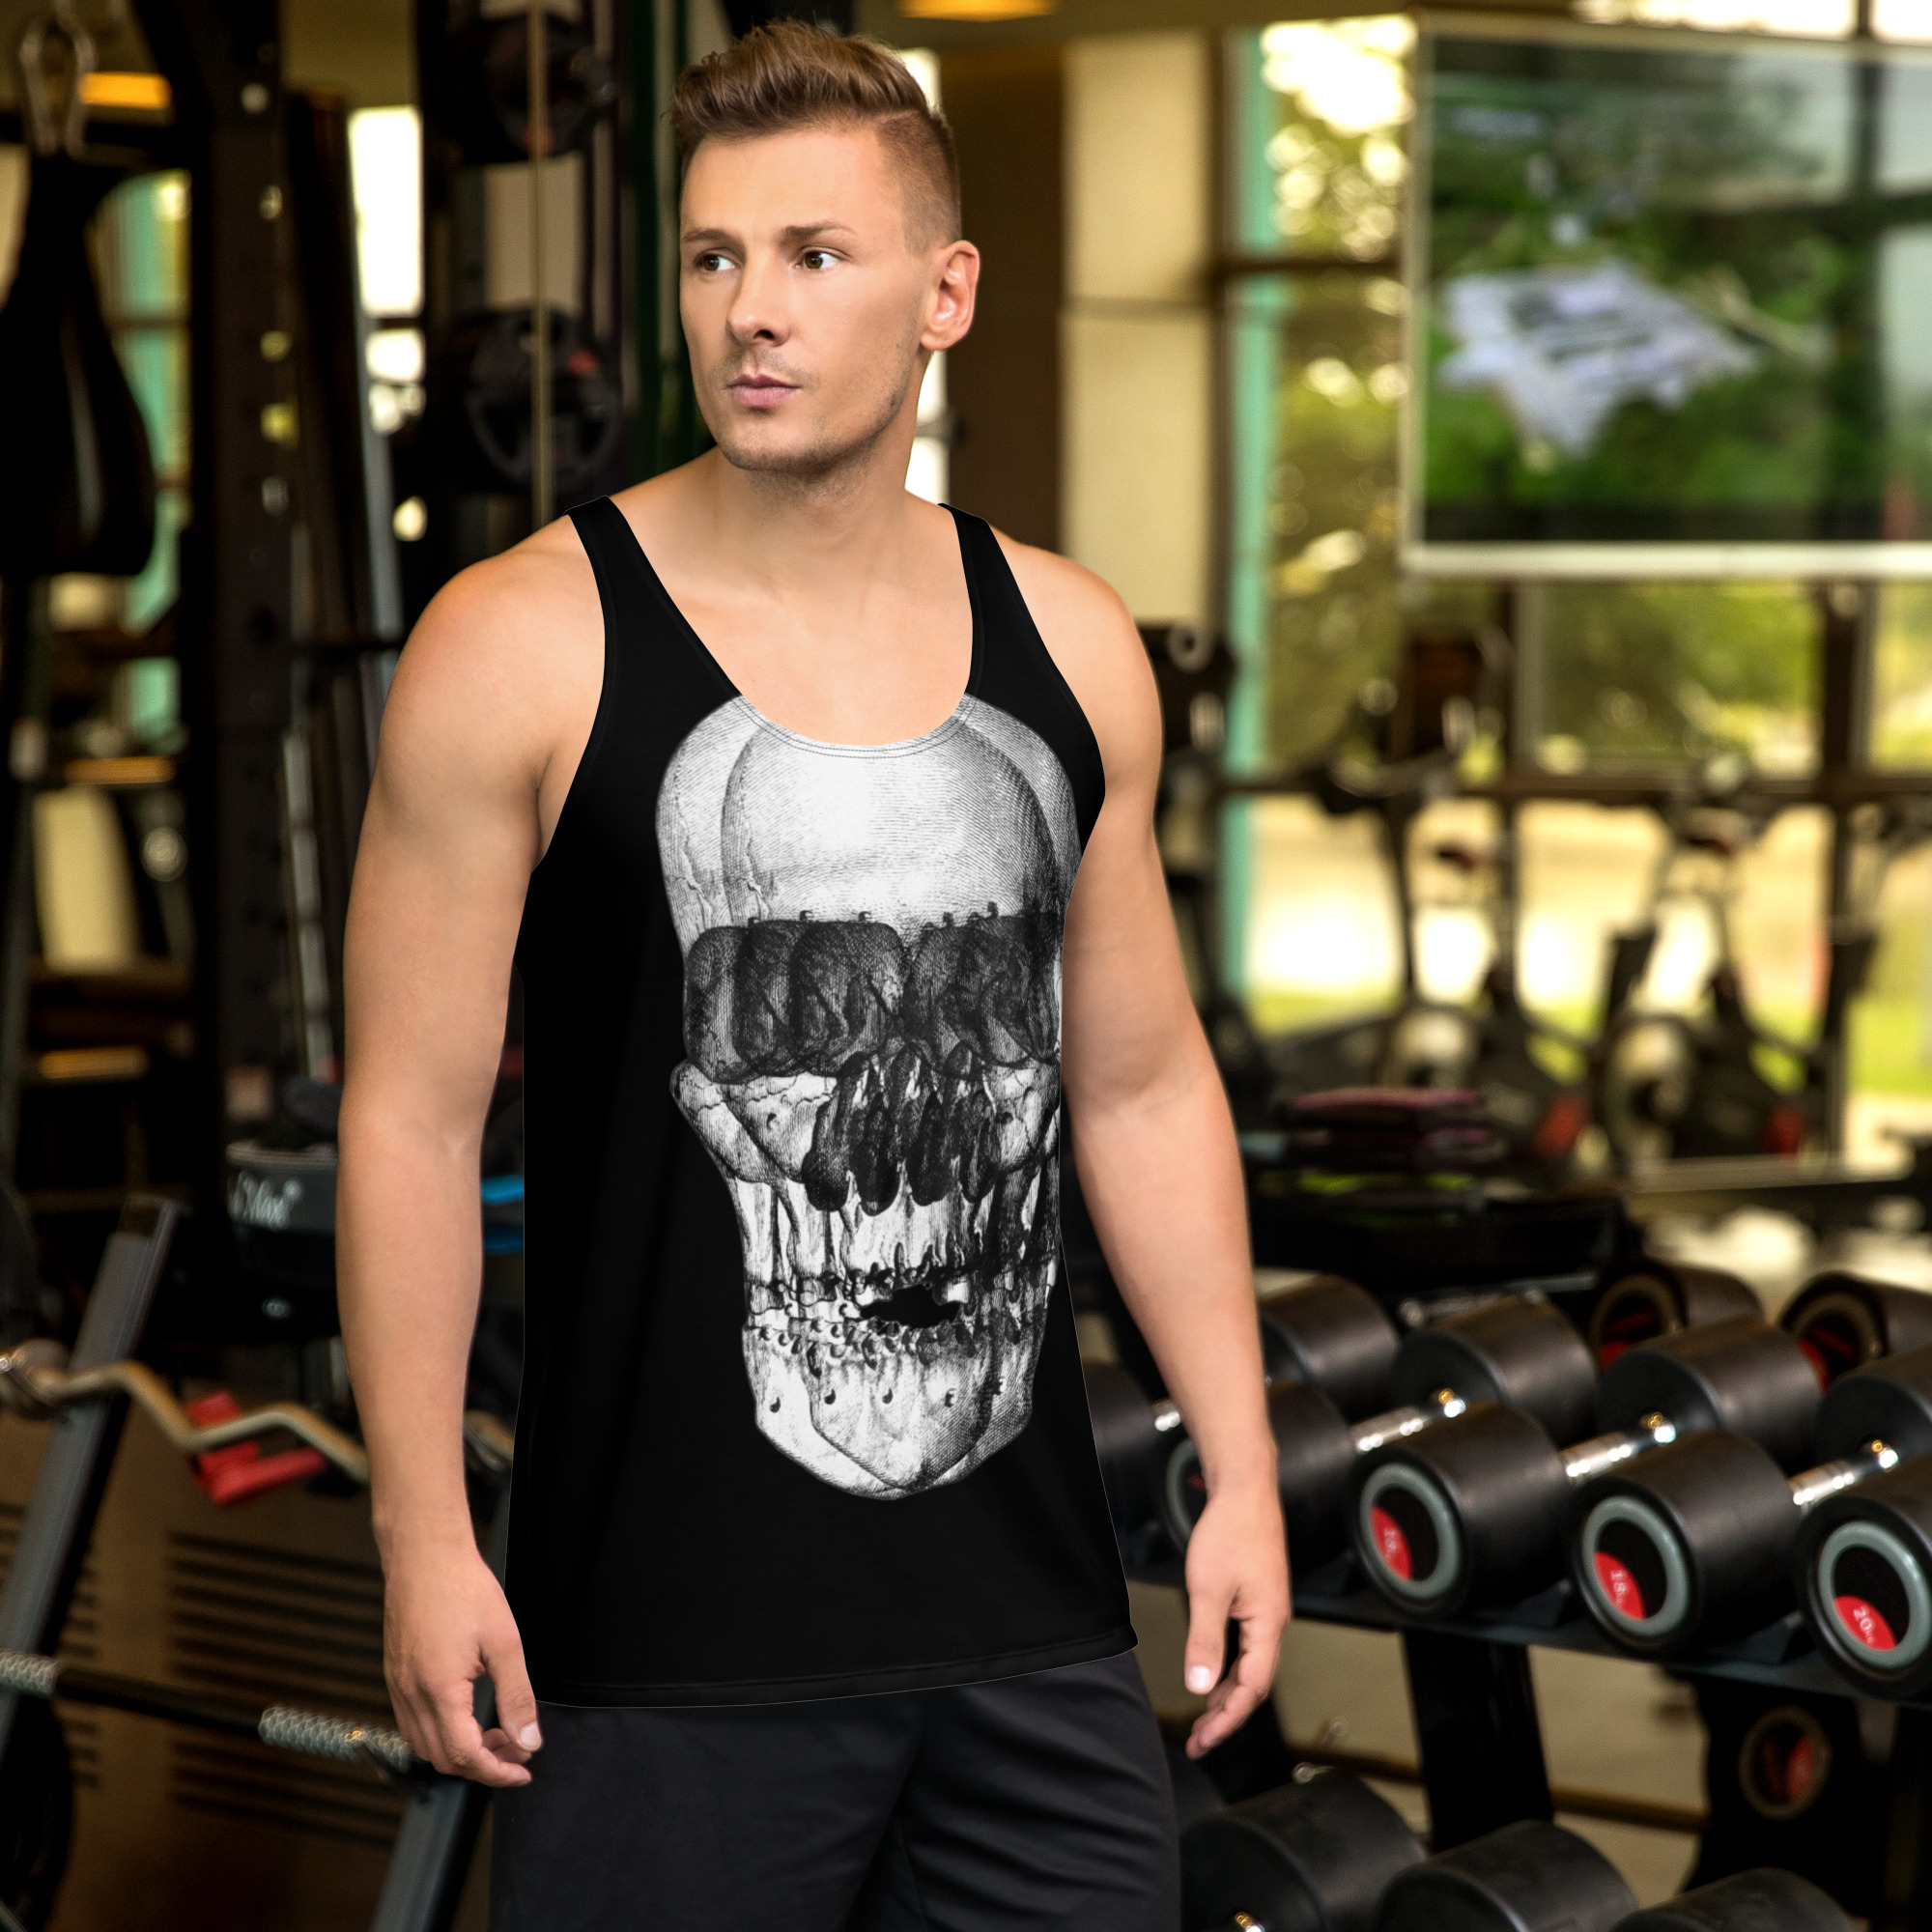 all-over-print-mens-tank-top-white-front-6385237725f34.jpg